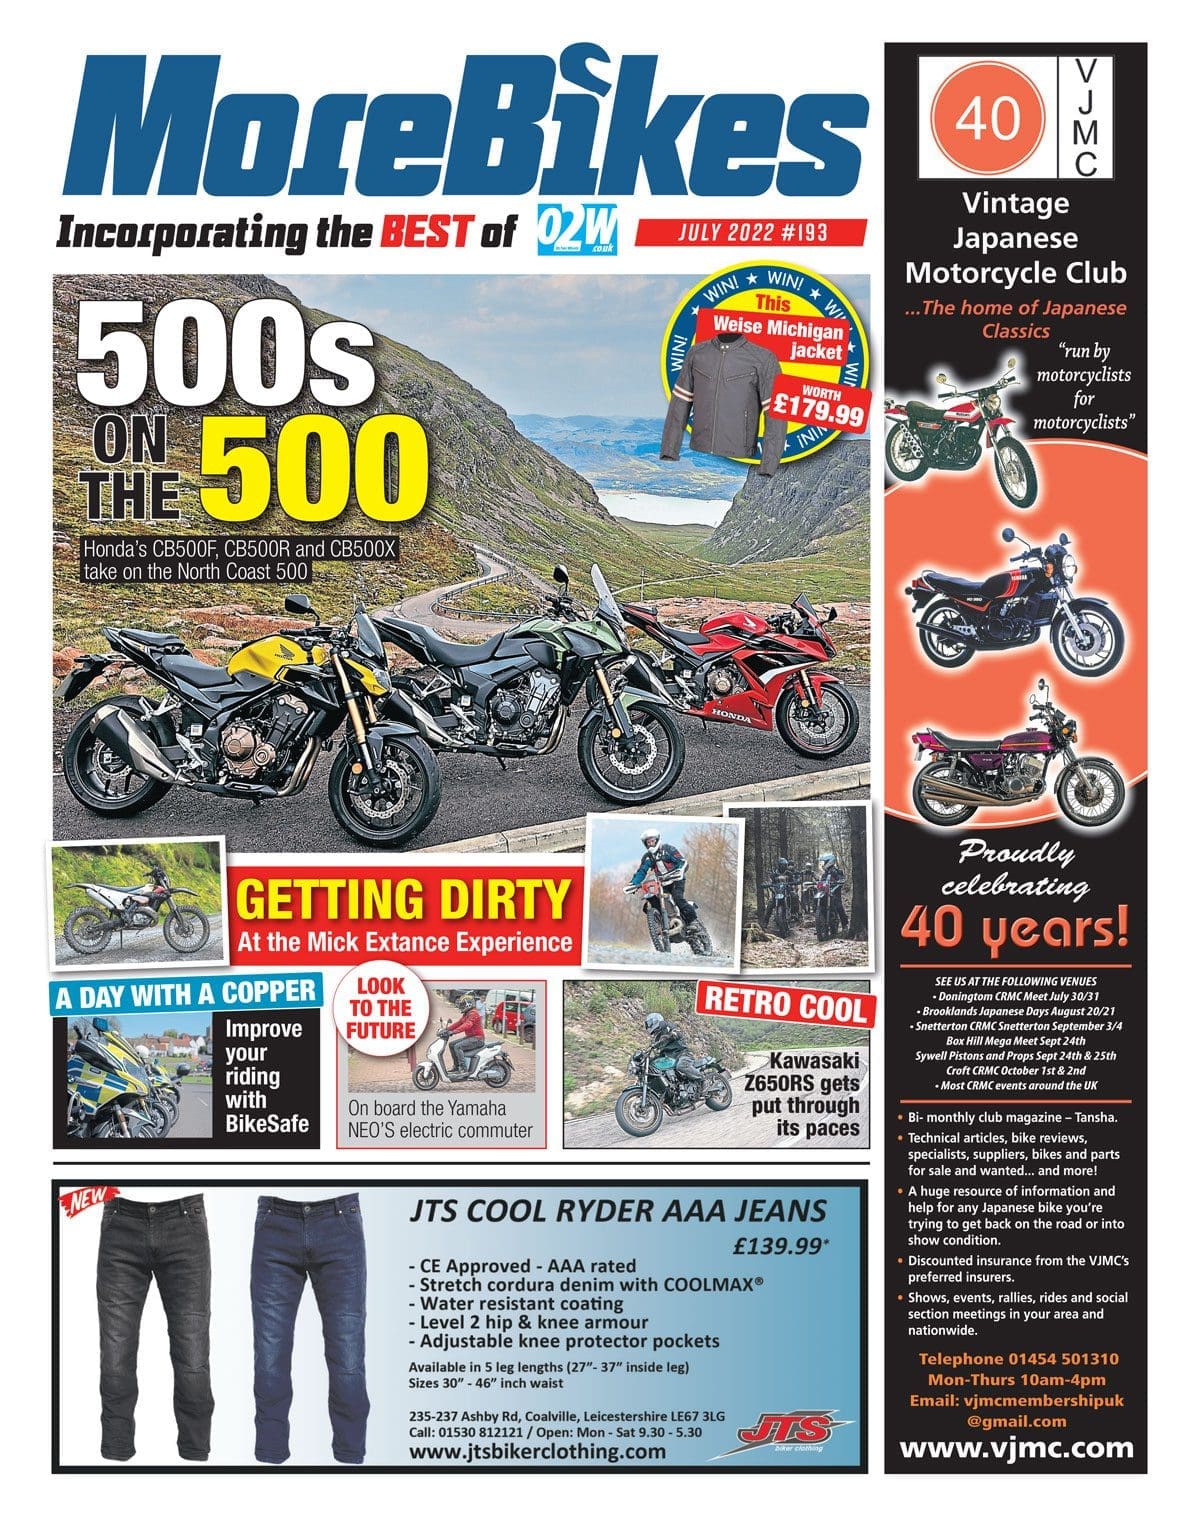 Preview: July issue of MoreBikes newspaper